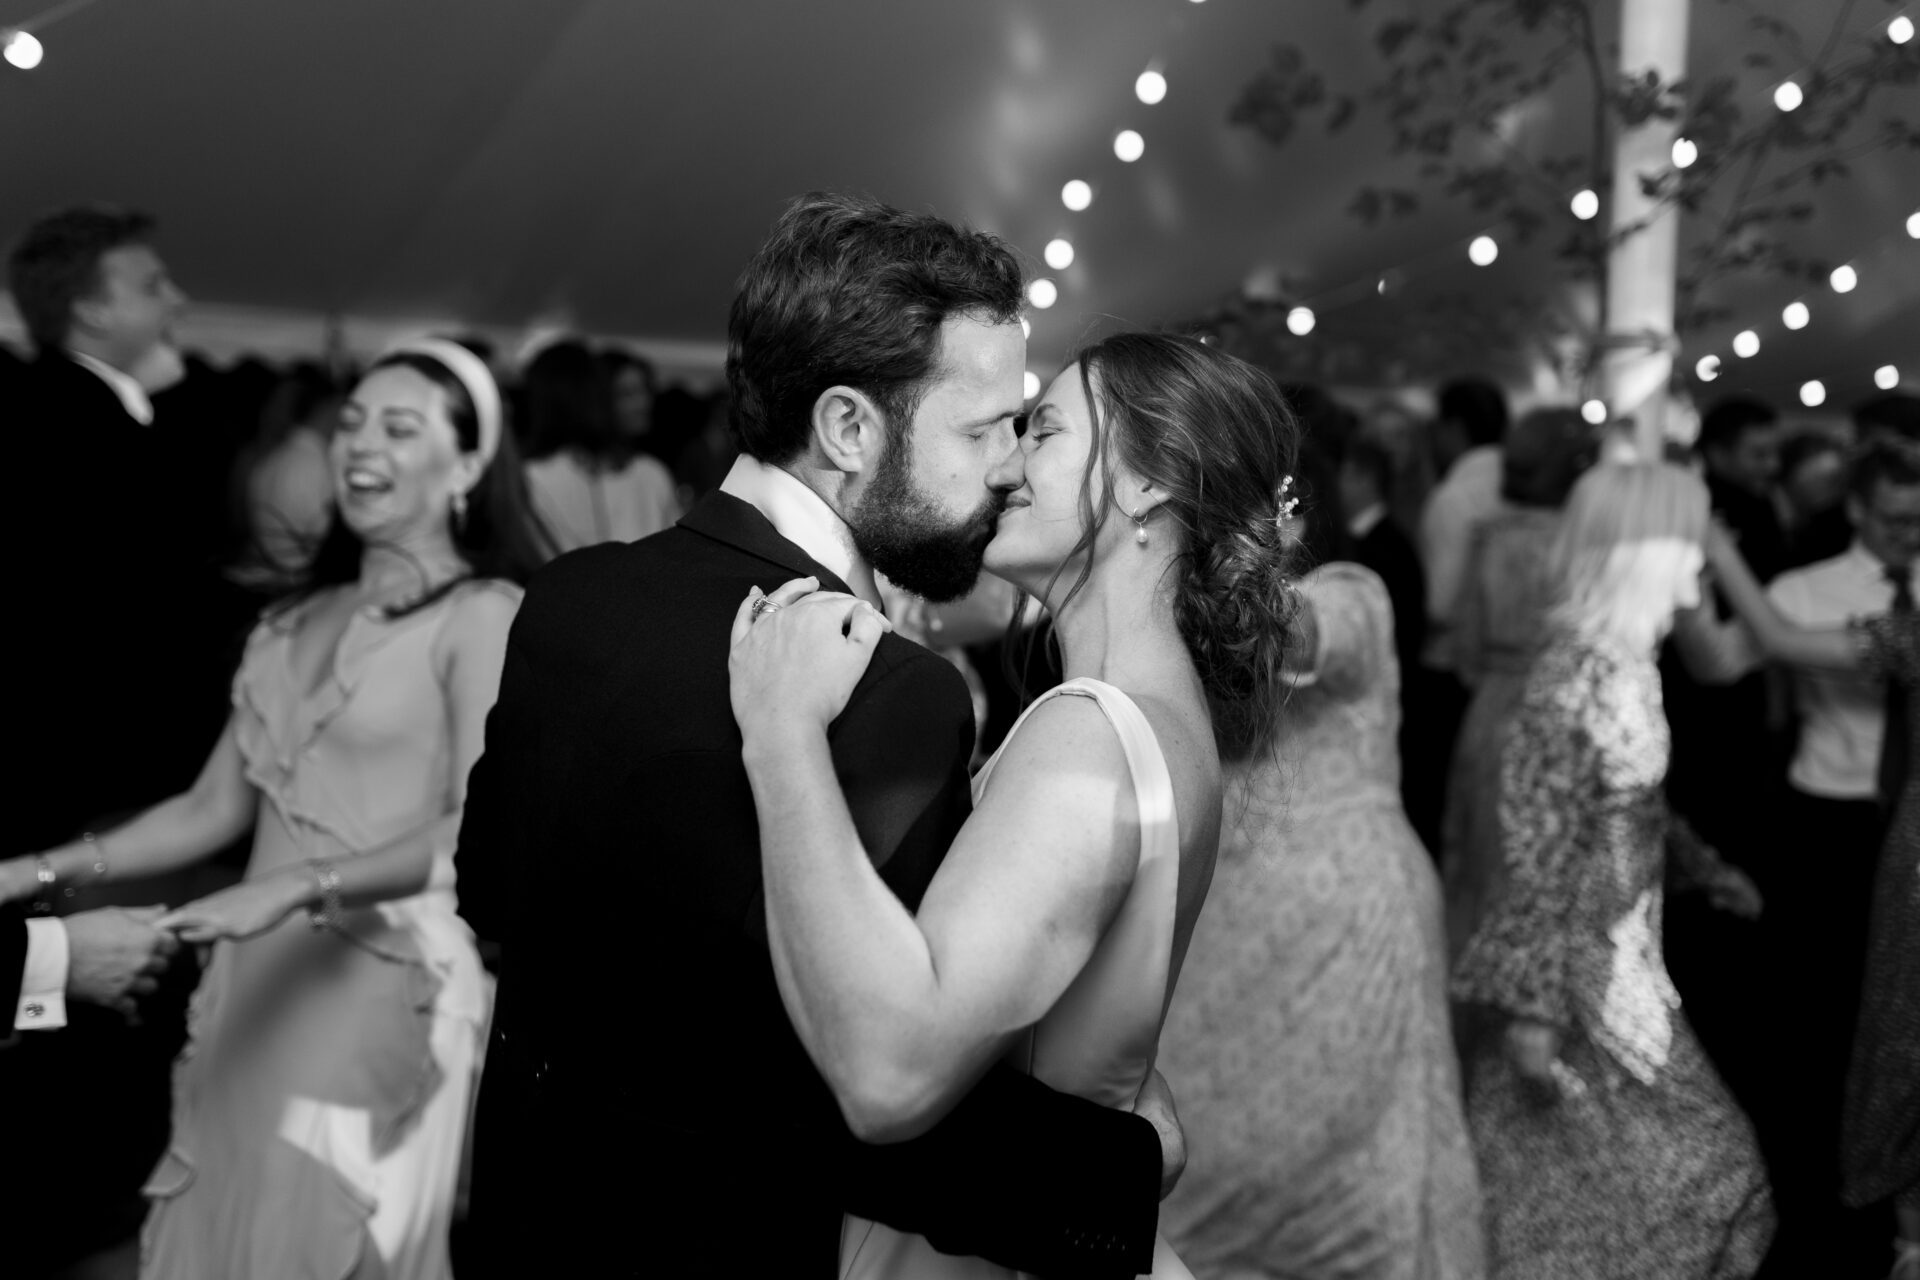 The bride and groom share a kiss on the dance floor at their Somerset marquee wedding